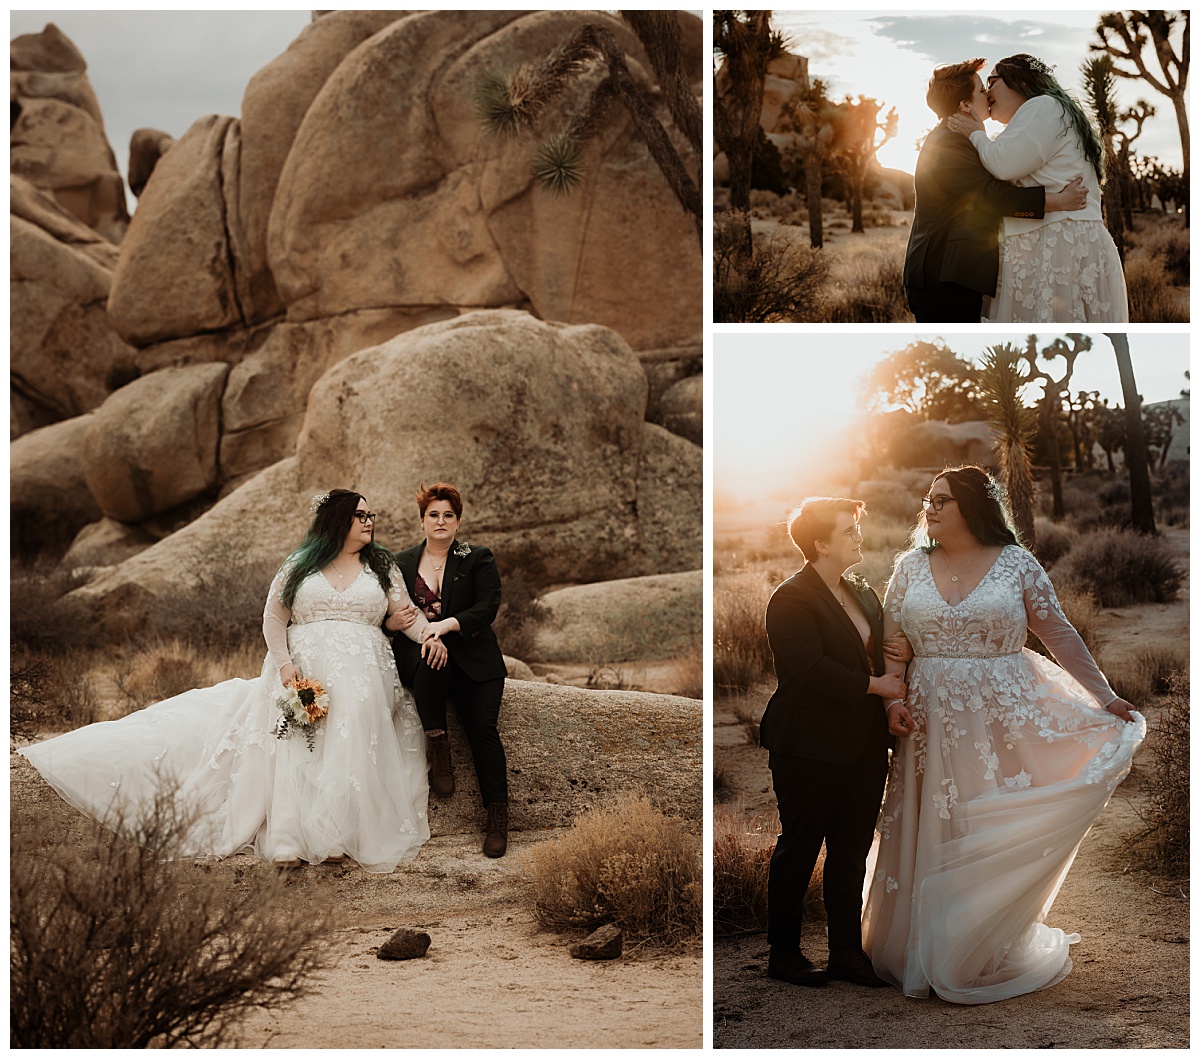 sun shines between wives leaning in for a kiss at Joshua Tree elopement